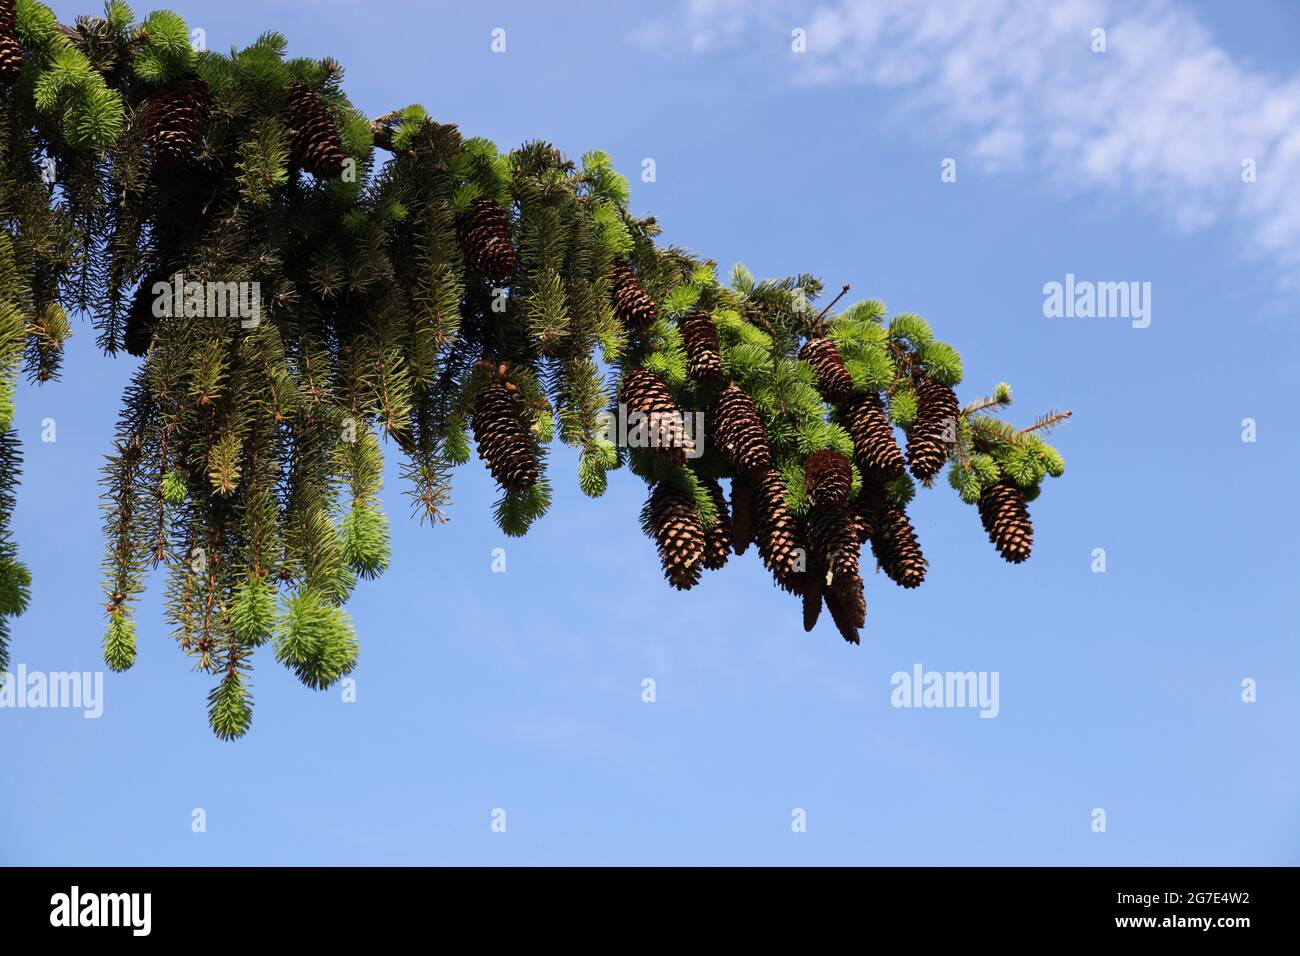 Canes of the spruce, pinaceae, picea punges, picea abies, spruce, Stock Photo